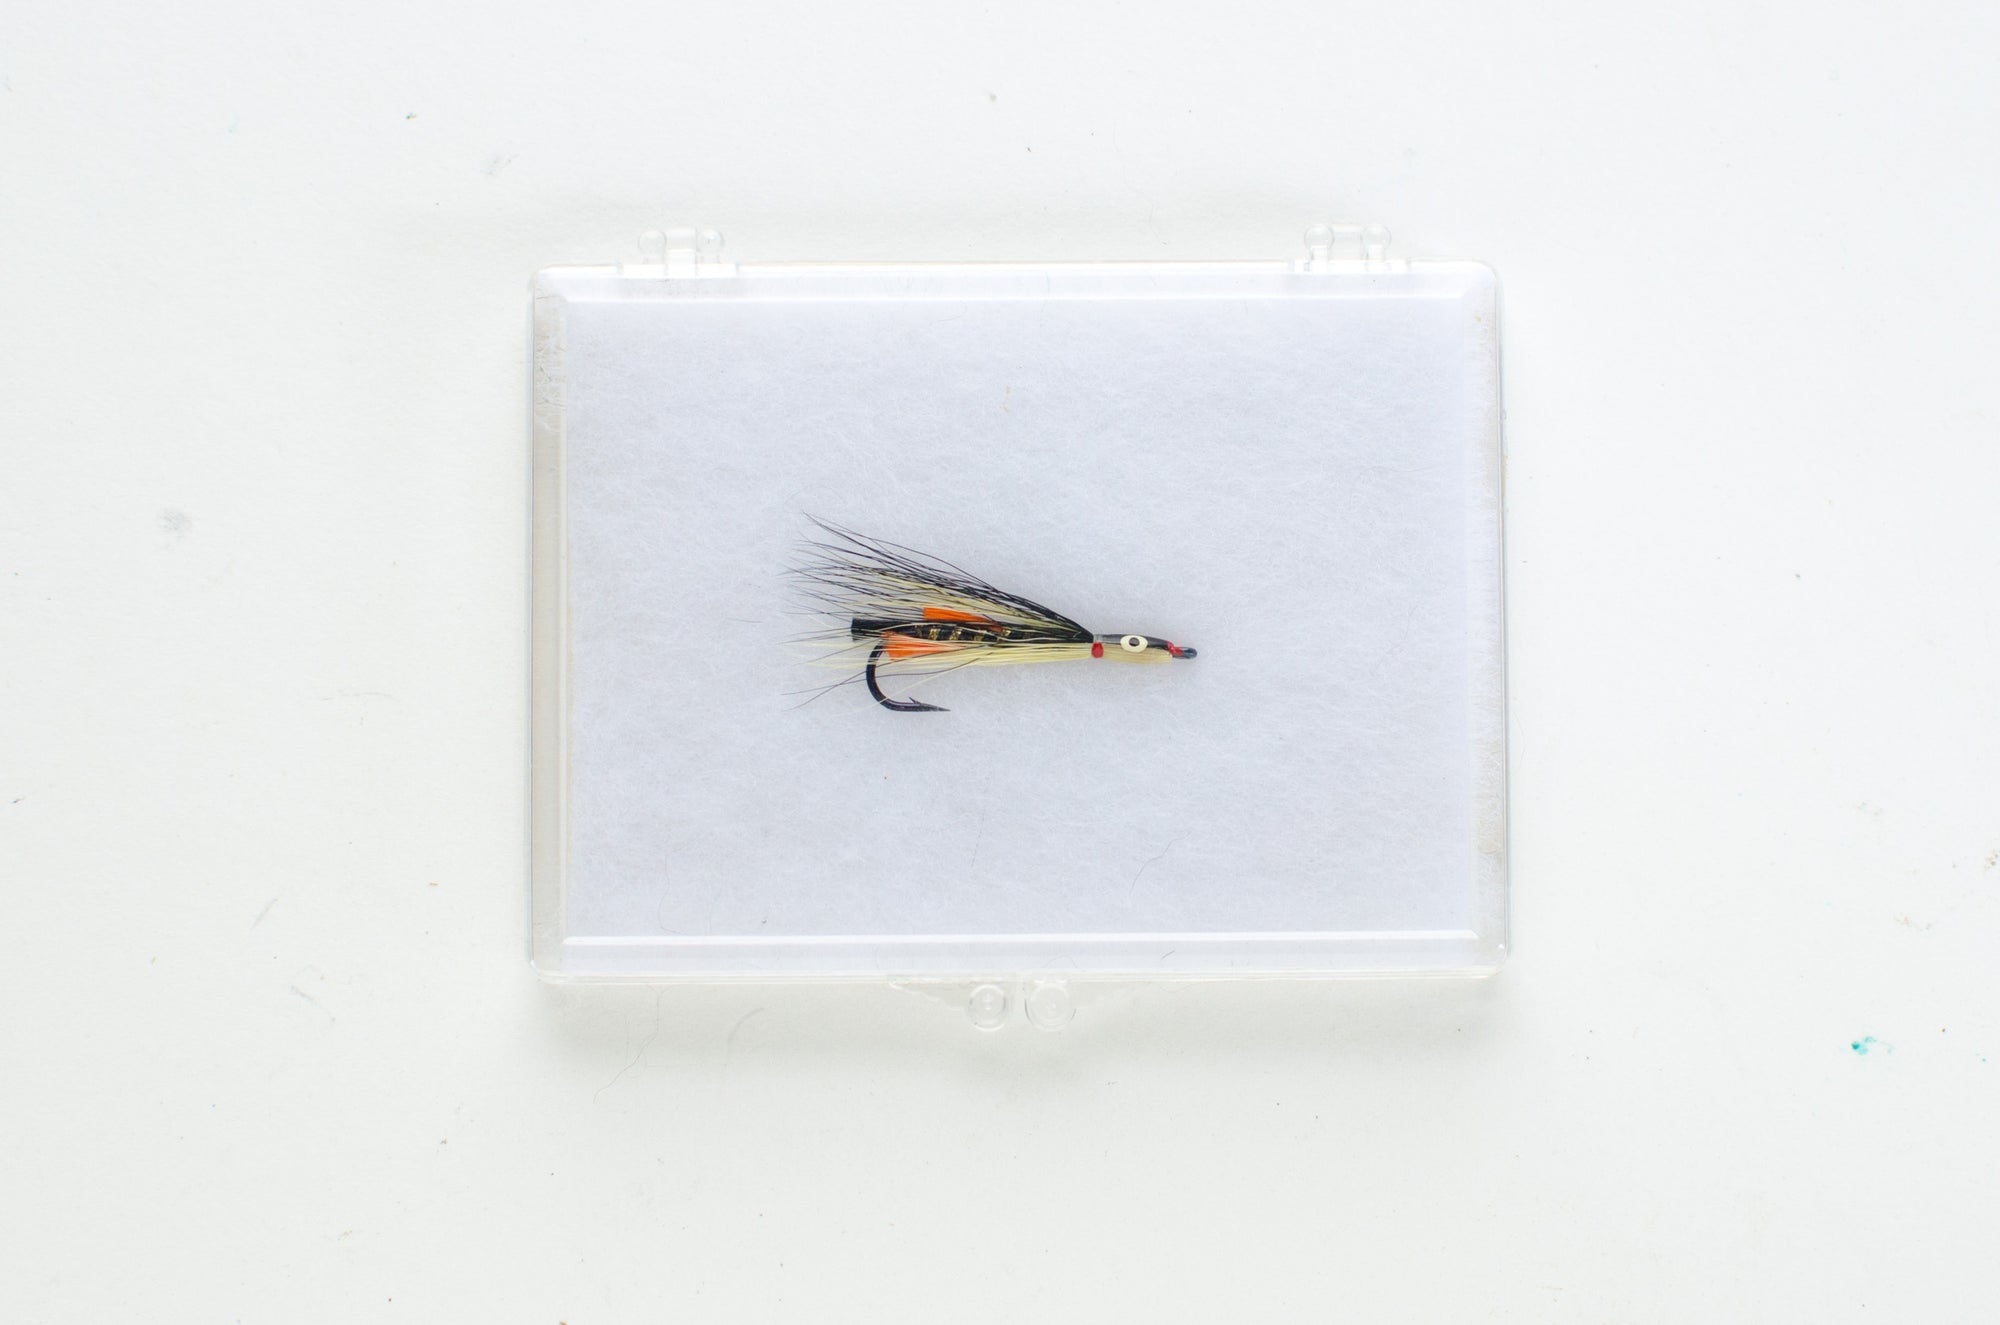 Redlip Shiner Fly by Keith Fulsher